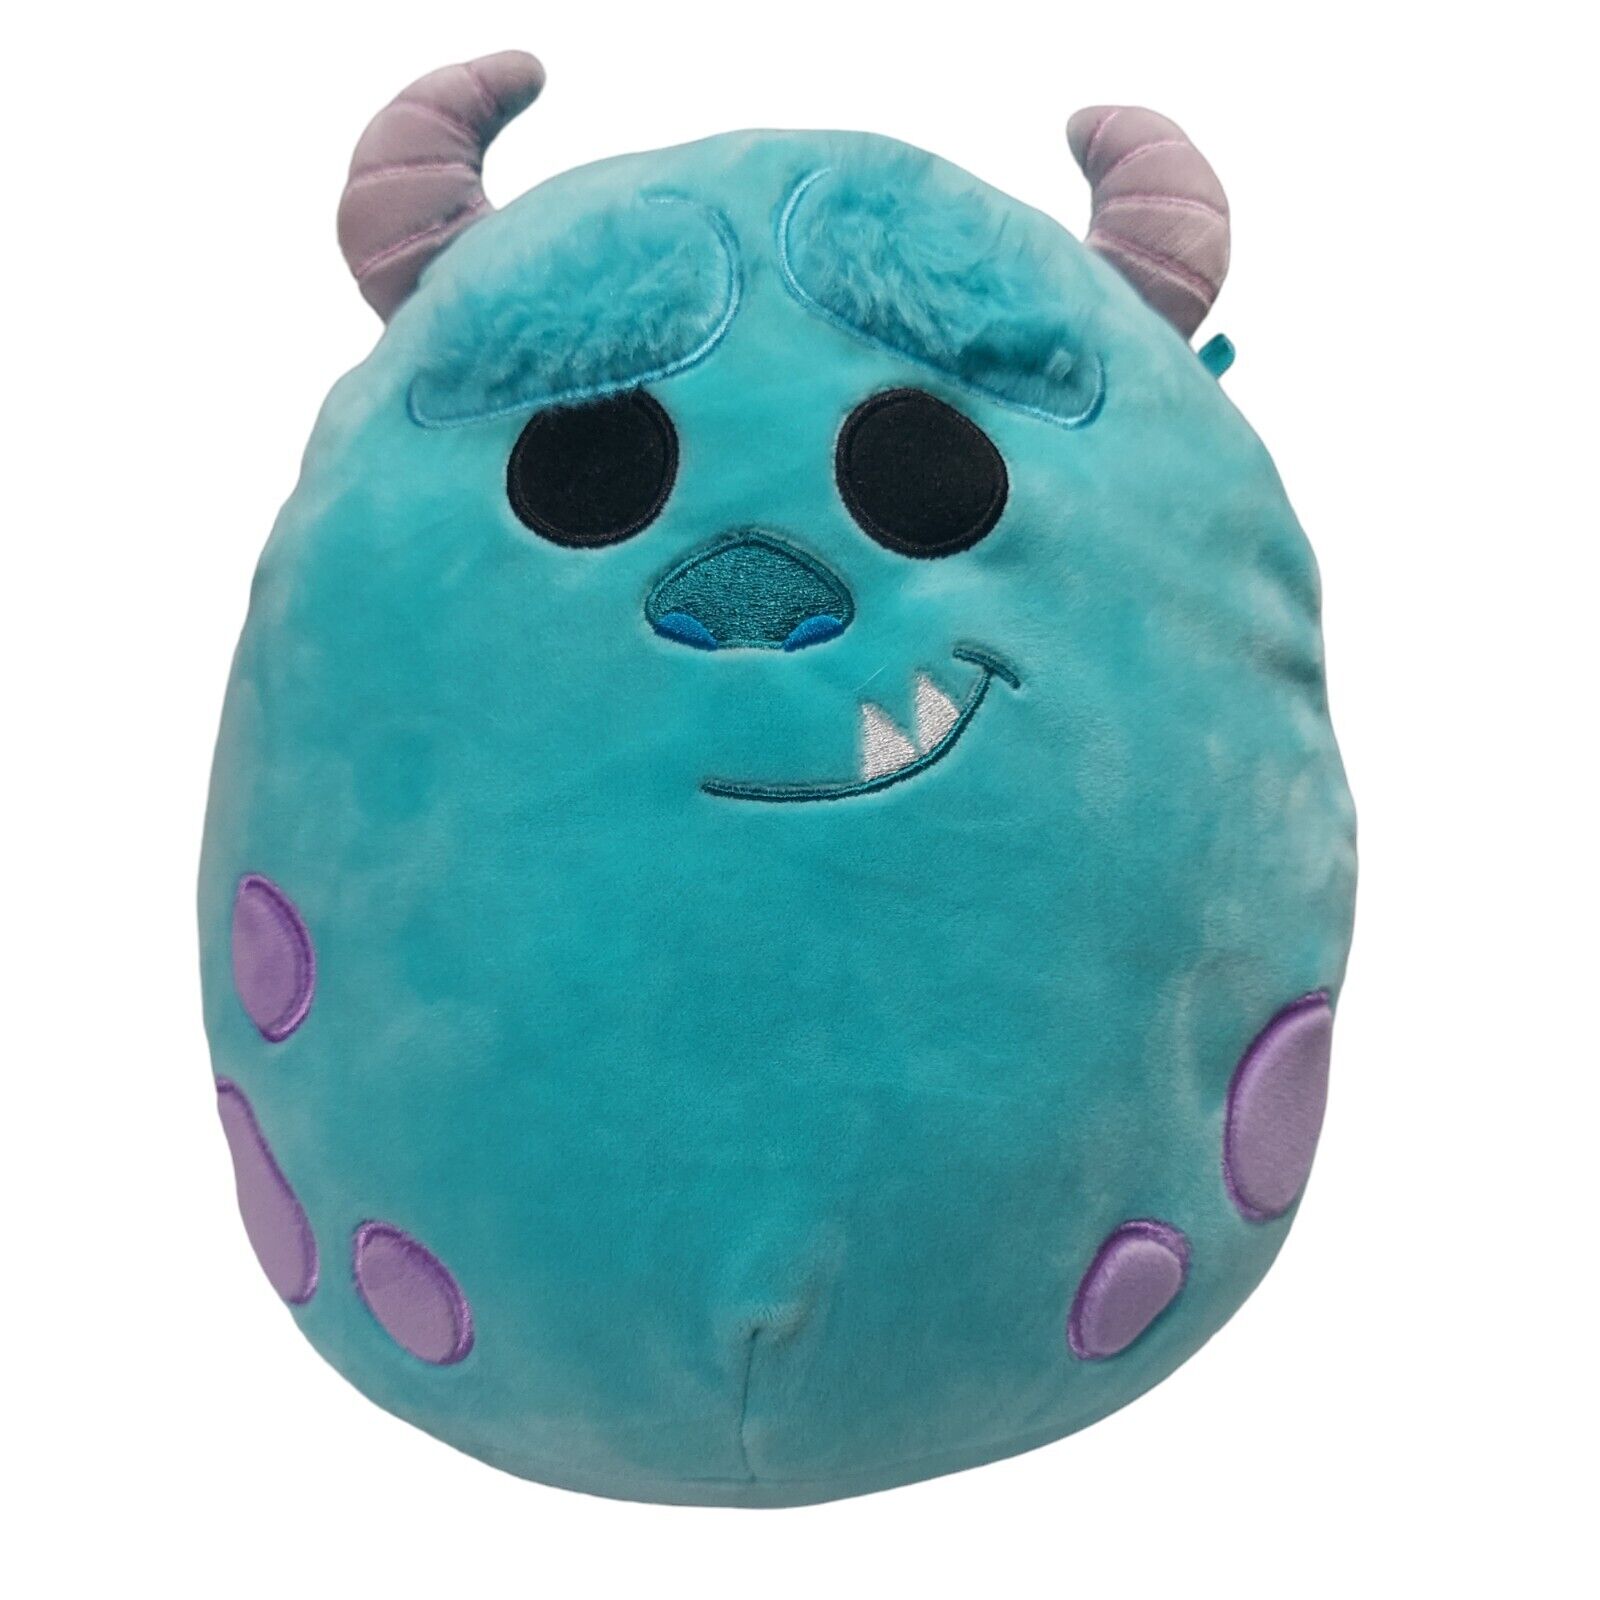 Squishmallow Official Kellytoy Disney Monsters Inc Sully 11" Plush Toy